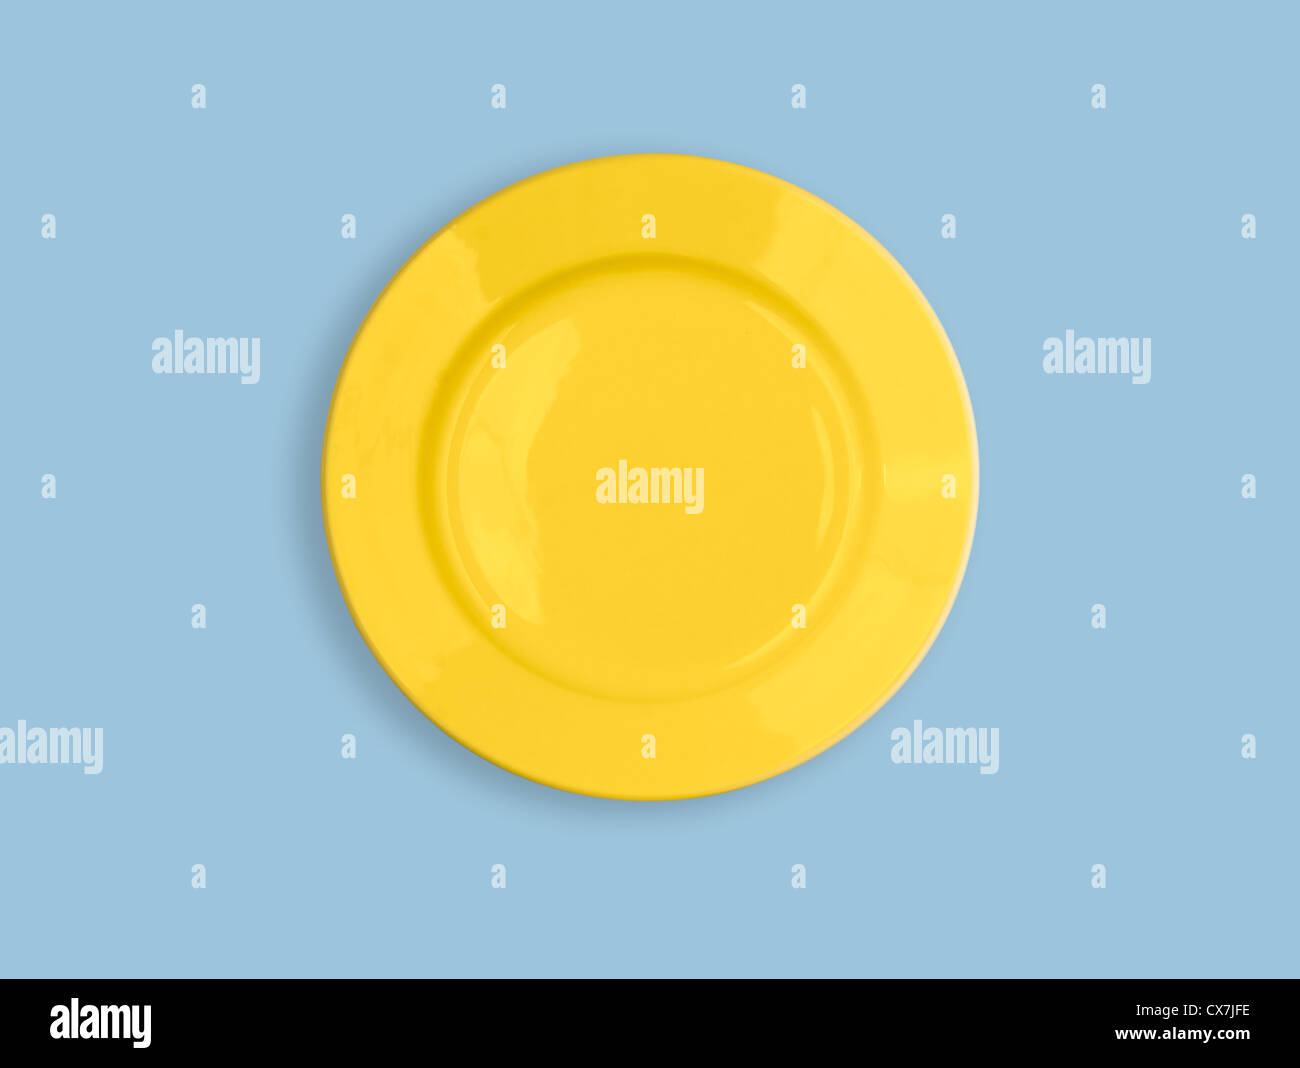 Yellow round plate on sky blue background Stock Photo